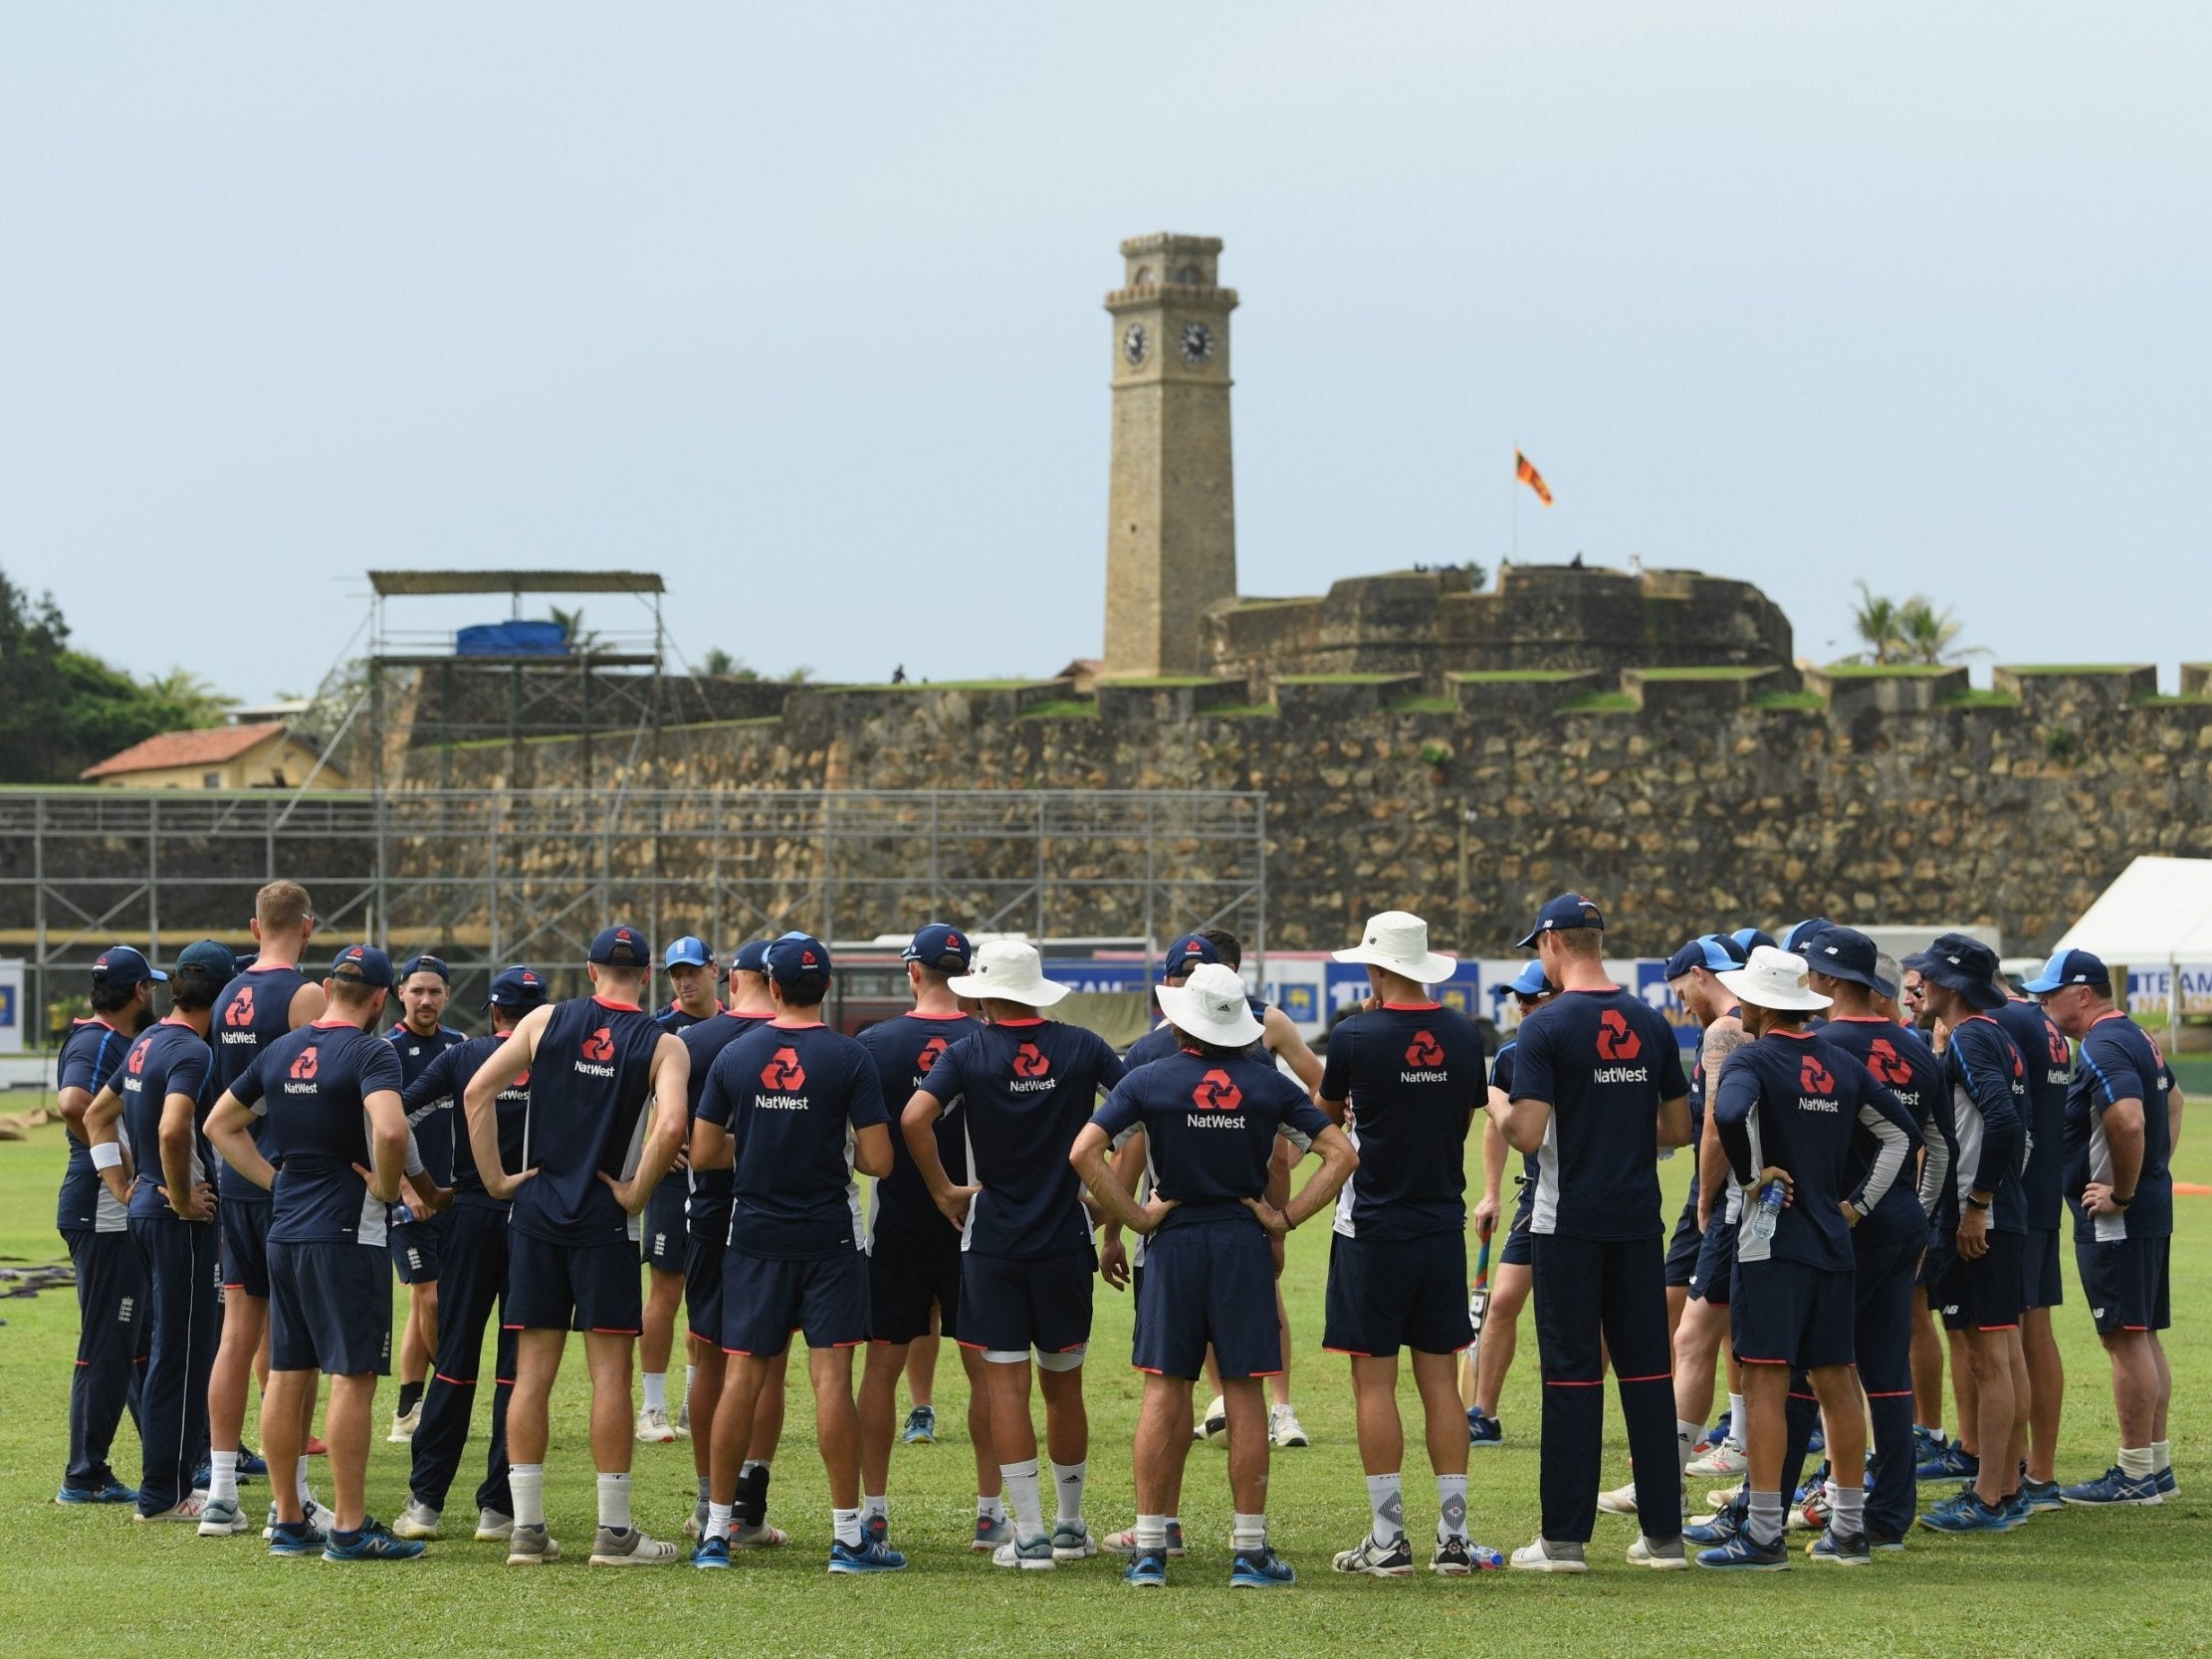 Galle's fort looks over rising stands and England's team meeting